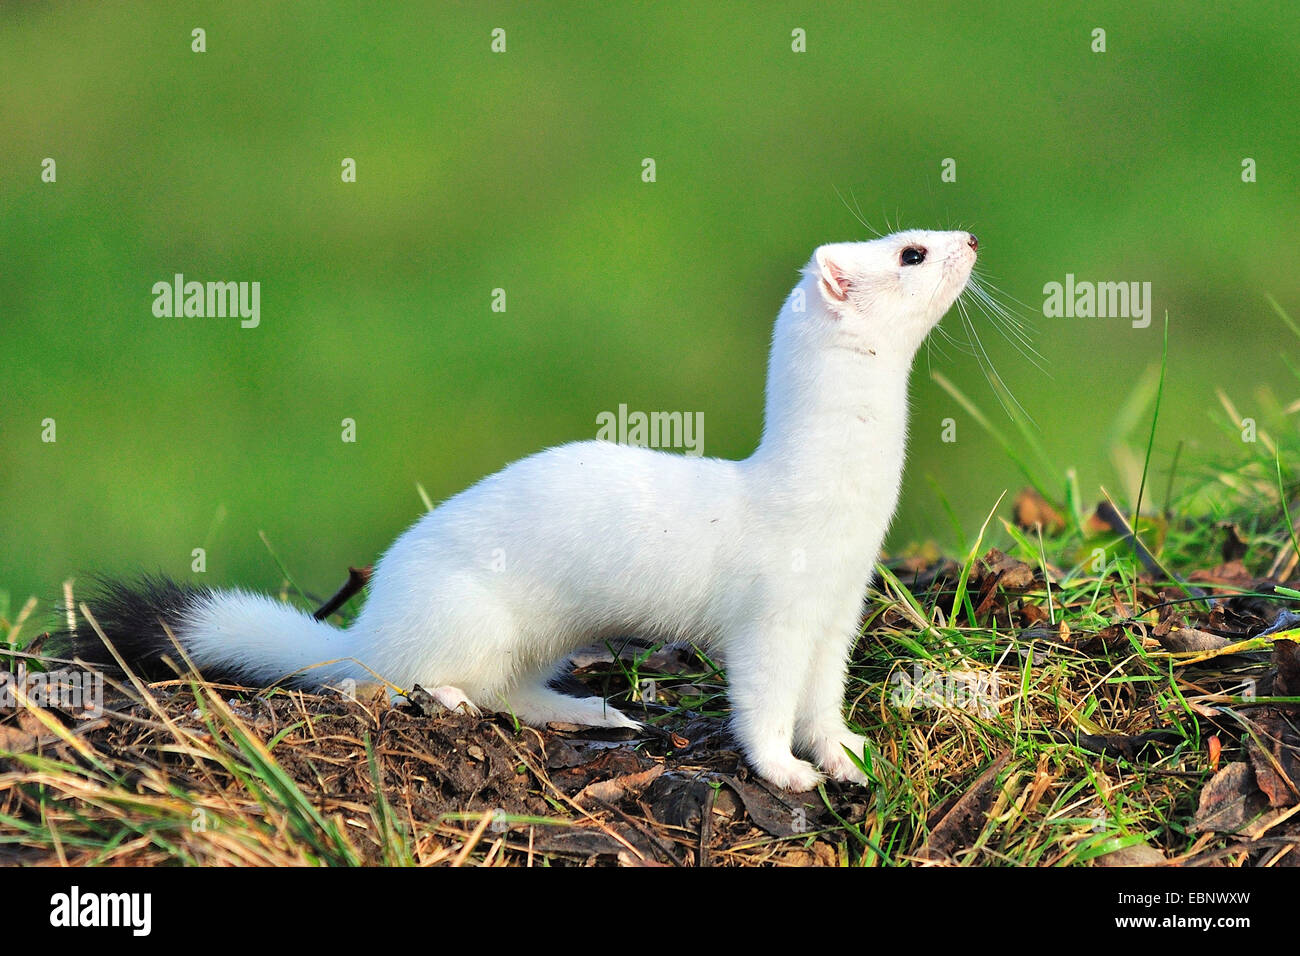 Ermine, Stoat, Short-tailed weasel (Mustela erminea), with winter coat, Germany Stock Photo